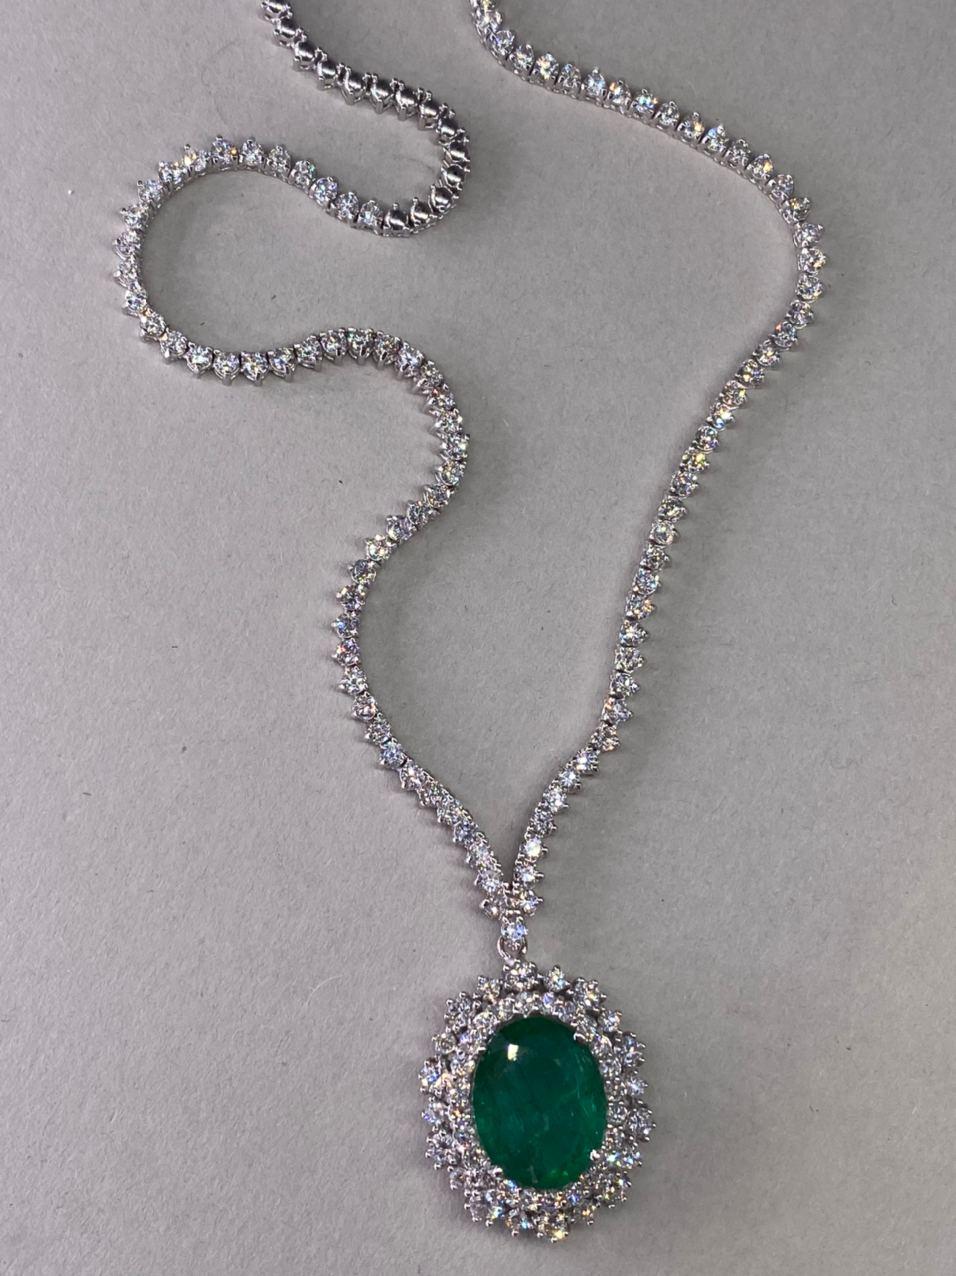 9.45 CTW Emerald 18K White Gold Diamond Necklace

Stamped: 750
Total Necklace Weight: 15.5 Grams
Necklace Length: 16 Inches
Emerald Weight: 5.25 Carat (12.701x10.00 Millimeters)
Diamond Weight: 4.20 Carat (F-G Color, VS2-SI1 Clarity)
Face Measures: